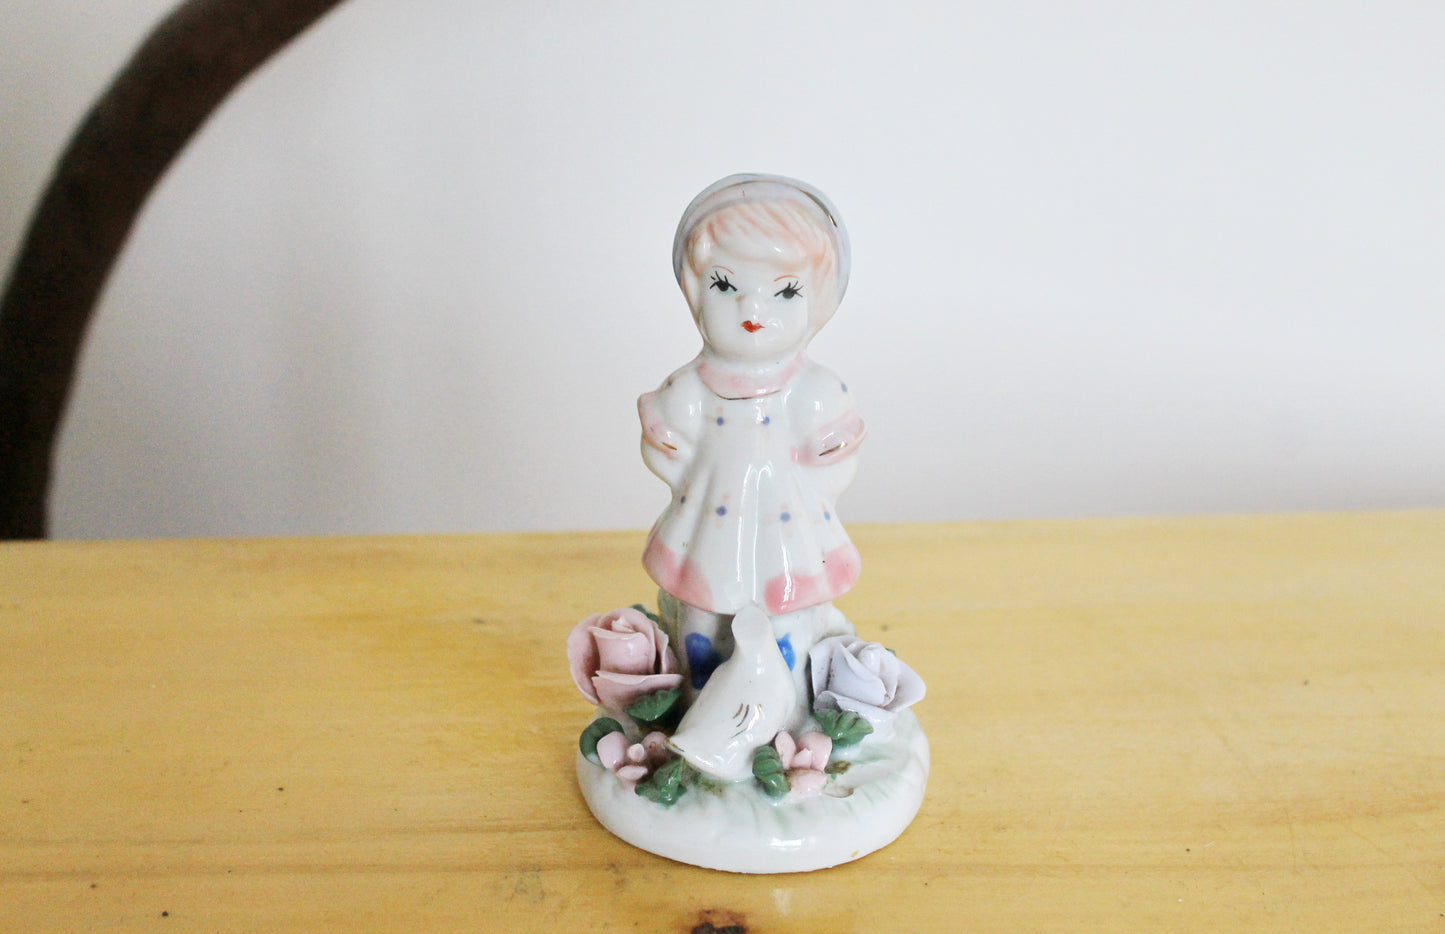 Vintage Porcelain - A girl with a bird - Germany porcelain figurine - vintage decor - Germany vintage - 1990s